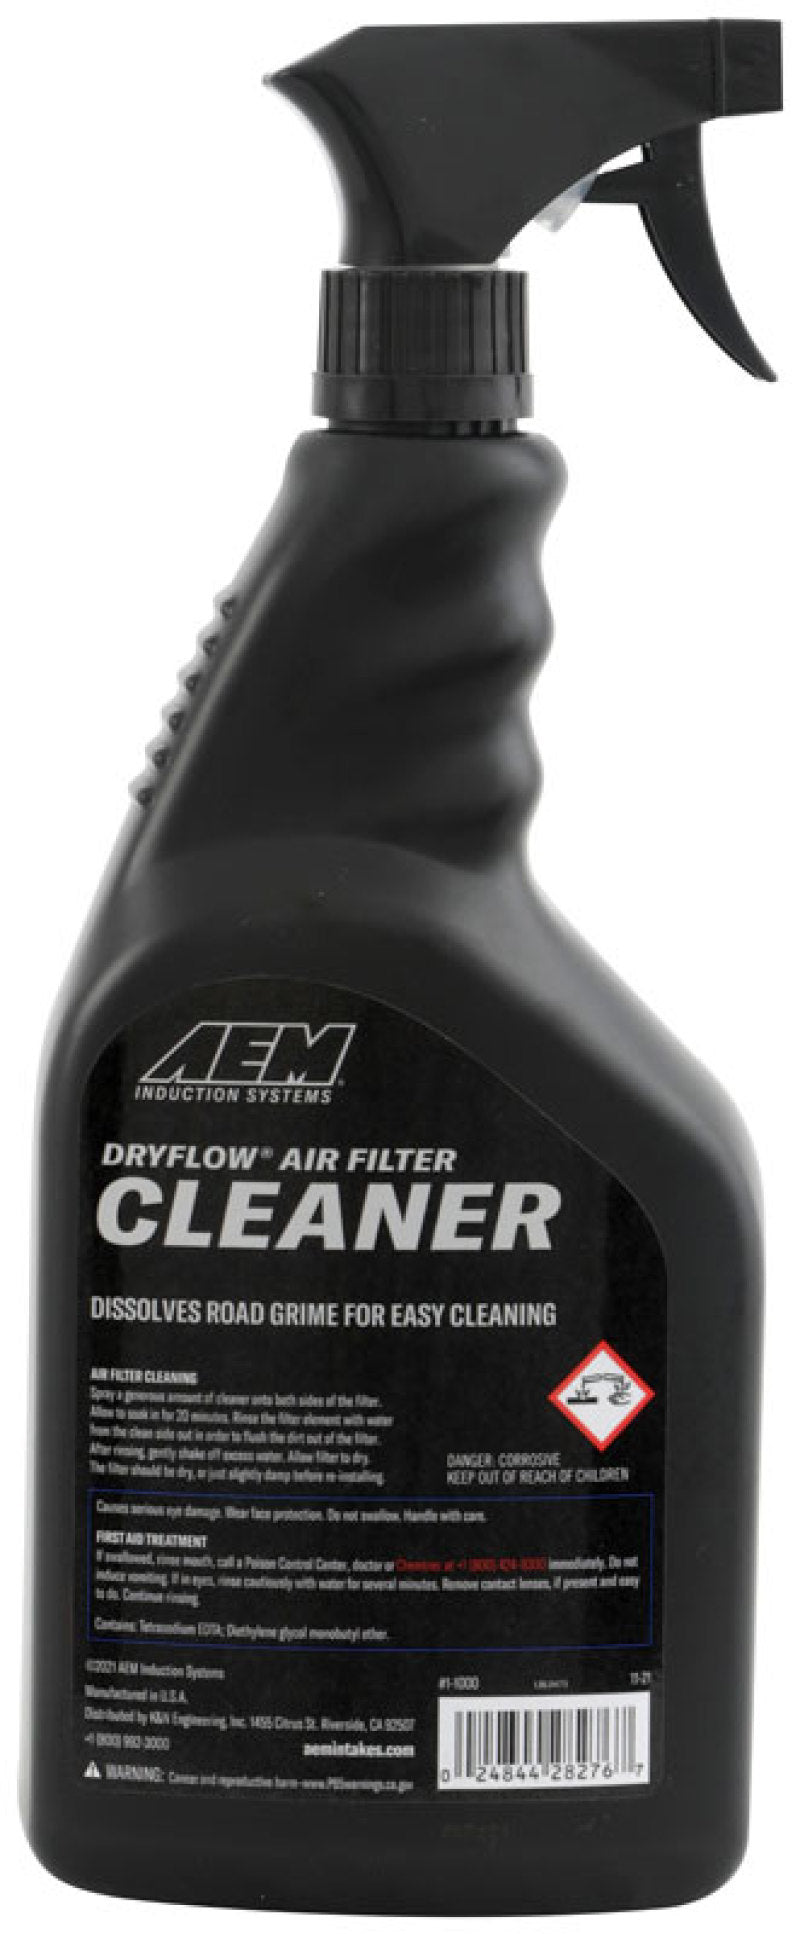 AEM IND Air Filter Cleaners